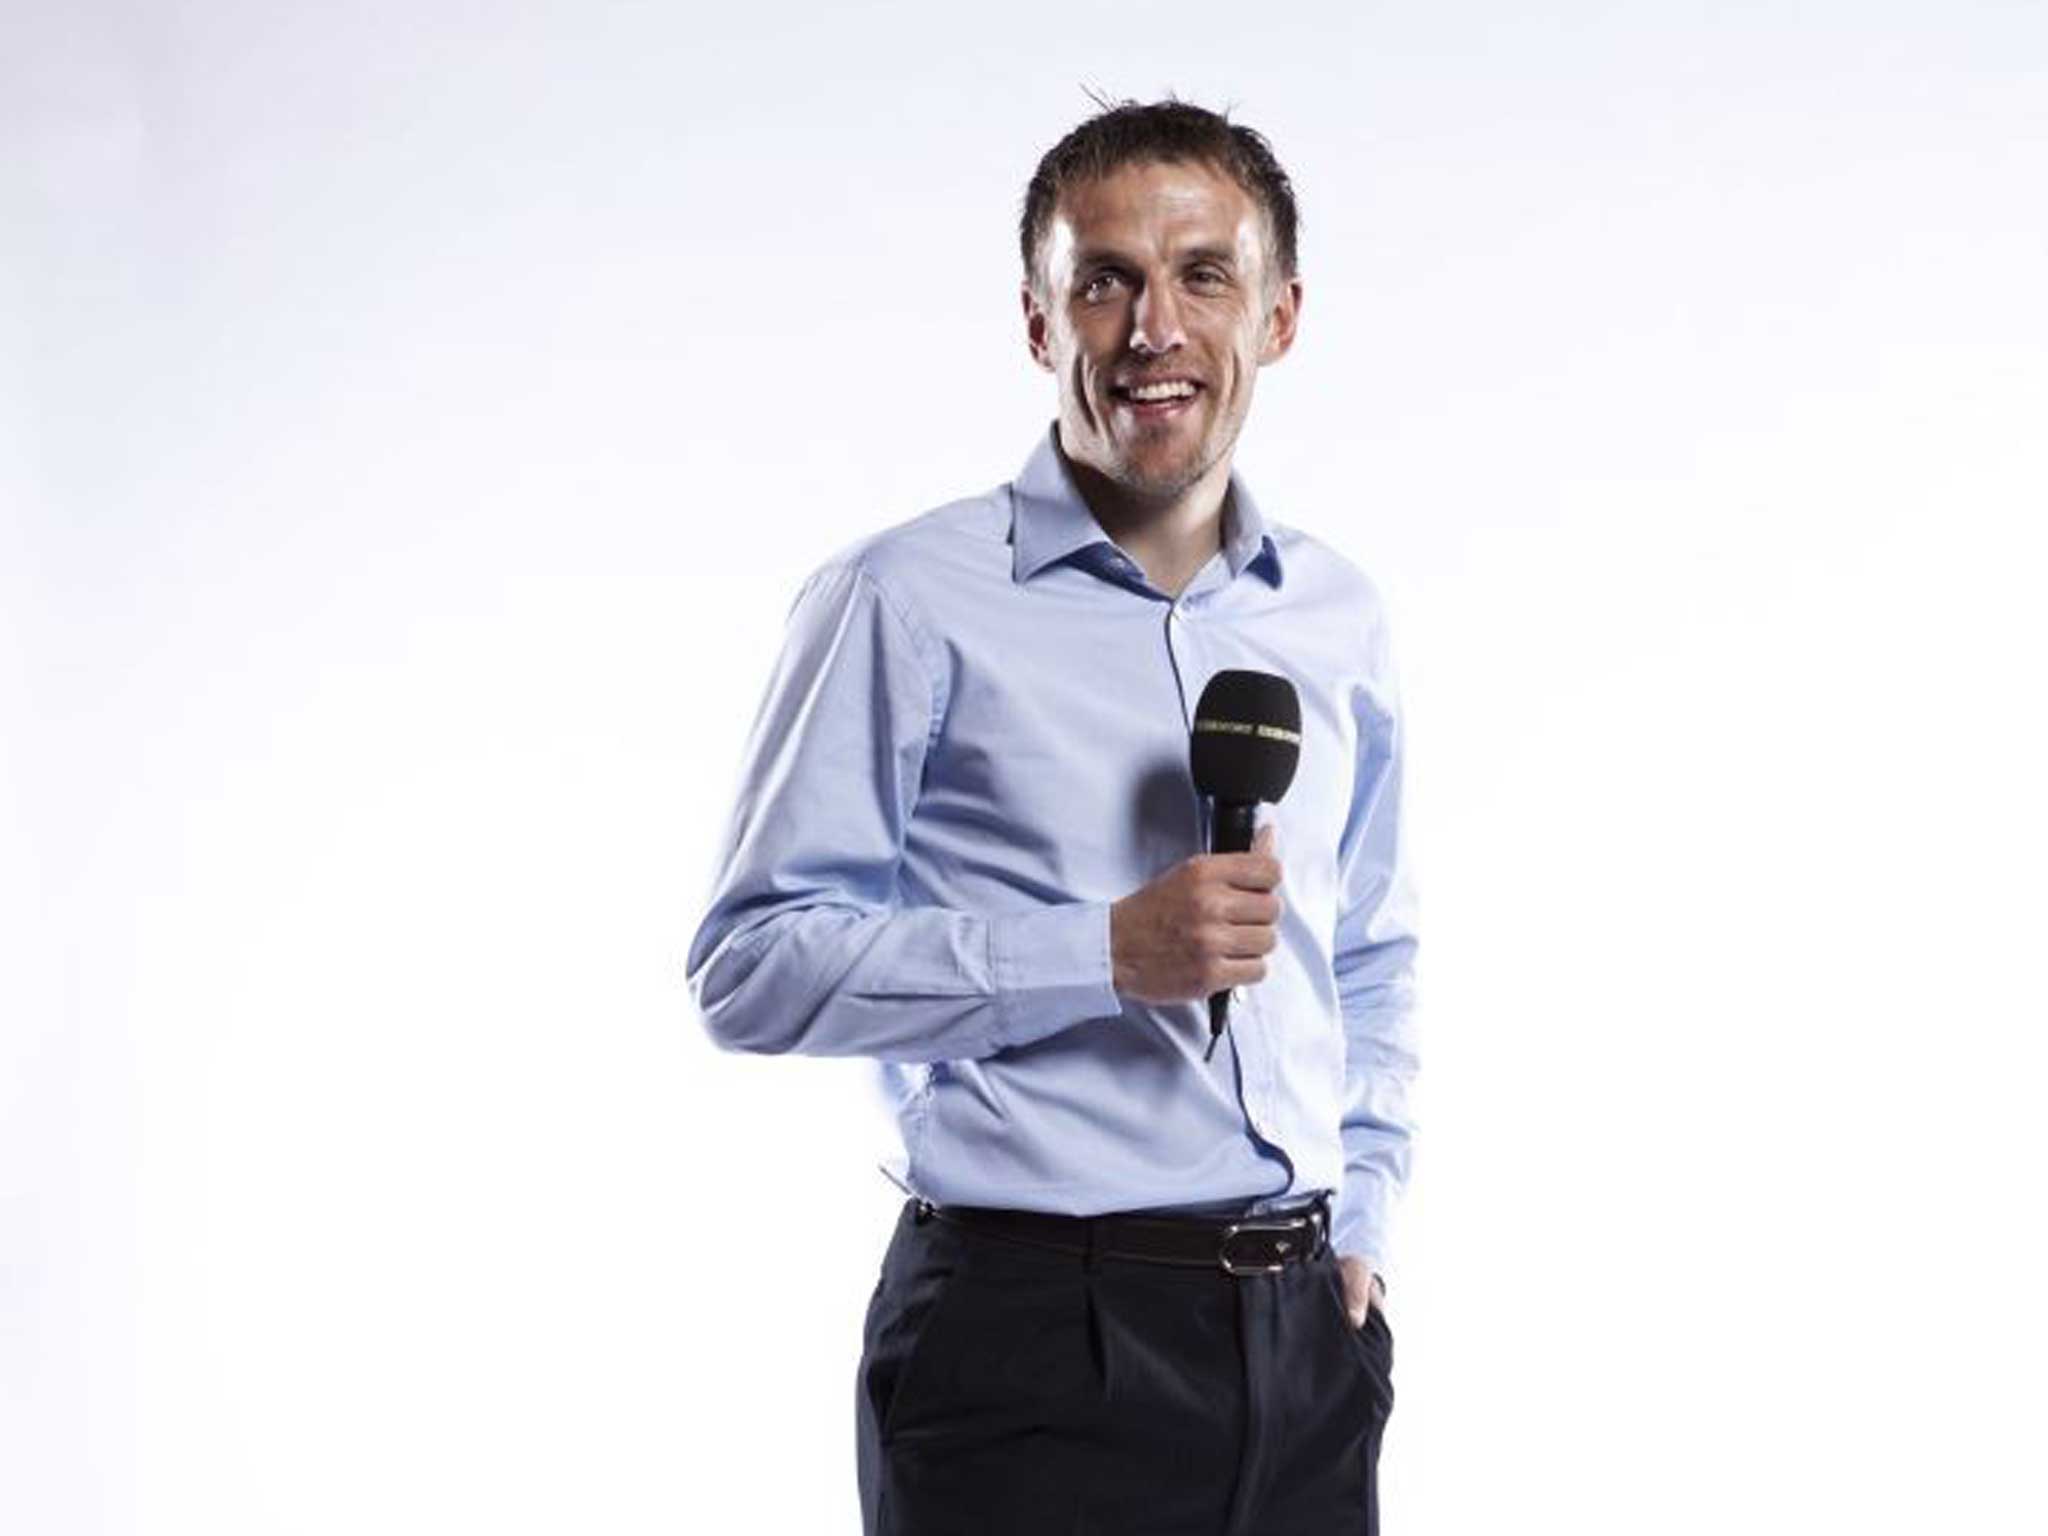 BBC co-commentator and pundit Phil Neville